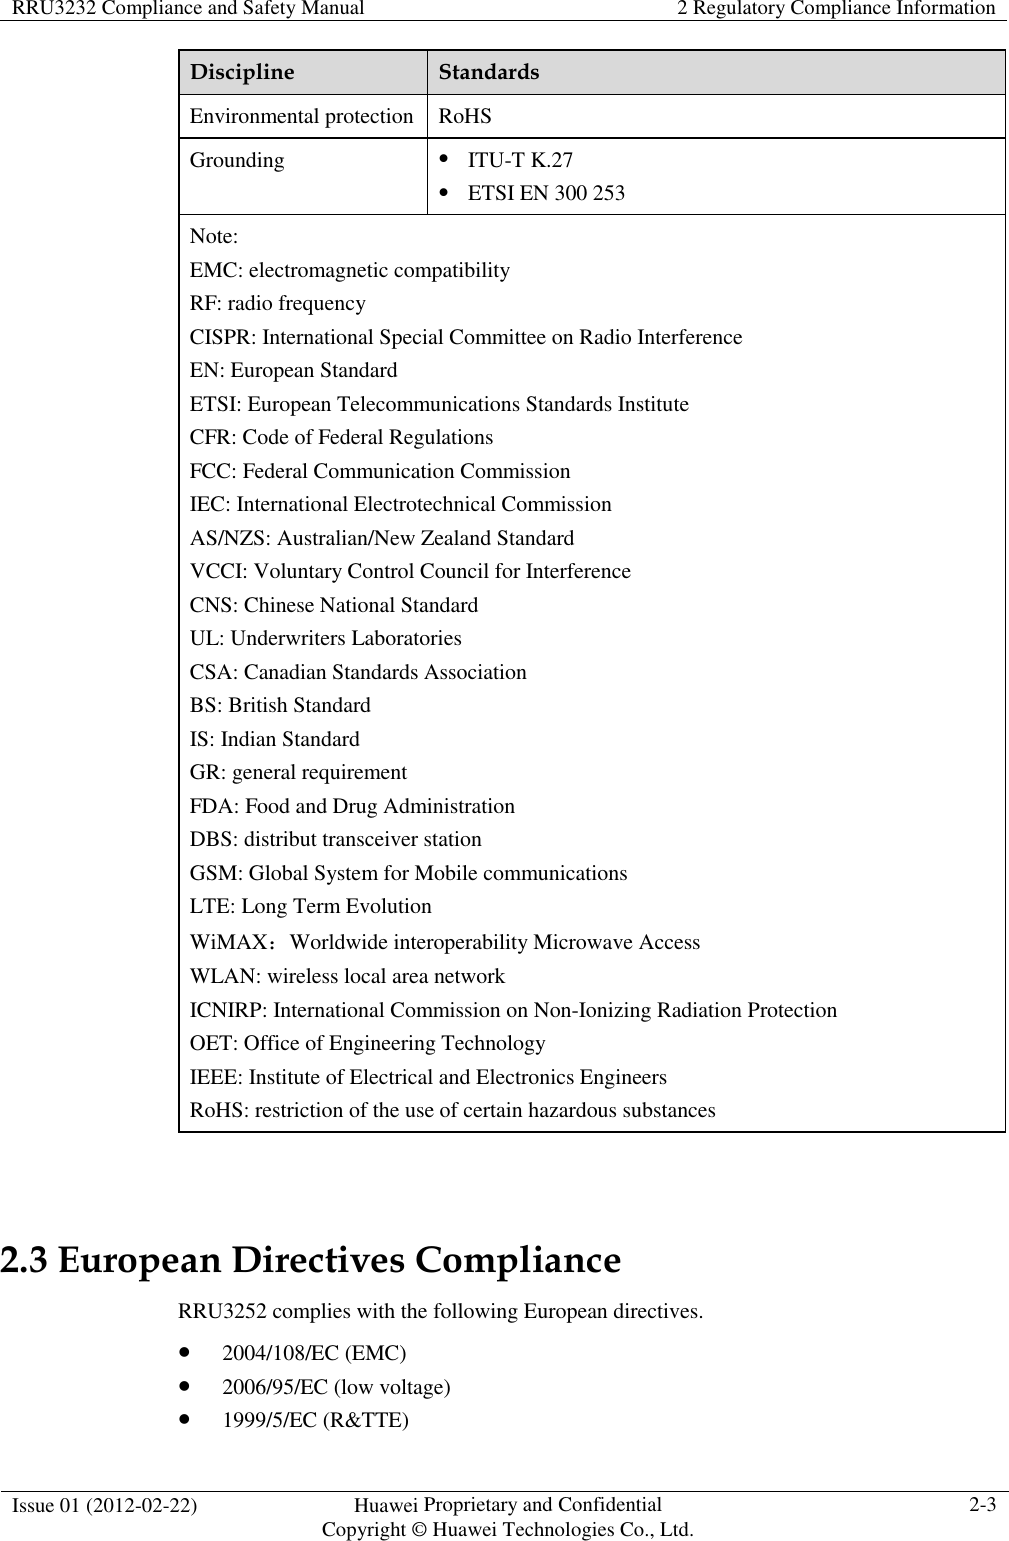 RRU3232 Compliance and Safety Manual  2 Regulatory Compliance Information  Issue 01 (2012-02-22)  Huawei Proprietary and Confidential           Copyright © Huawei Technologies Co., Ltd. 2-3  Discipline  Standards Environmental protection RoHS Grounding  ITU-T K.27  ETSI EN 300 253 Note: EMC: electromagnetic compatibility RF: radio frequency CISPR: International Special Committee on Radio Interference EN: European Standard ETSI: European Telecommunications Standards Institute CFR: Code of Federal Regulations FCC: Federal Communication Commission IEC: International Electrotechnical Commission AS/NZS: Australian/New Zealand Standard VCCI: Voluntary Control Council for Interference CNS: Chinese National Standard UL: Underwriters Laboratories CSA: Canadian Standards Association BS: British Standard IS: Indian Standard GR: general requirement FDA: Food and Drug Administration DBS: distribut transceiver station GSM: Global System for Mobile communications LTE: Long Term Evolution WiMAX：Worldwide interoperability Microwave Access WLAN: wireless local area network ICNIRP: International Commission on Non-Ionizing Radiation Protection OET: Office of Engineering Technology IEEE: Institute of Electrical and Electronics Engineers RoHS: restriction of the use of certain hazardous substances  2.3 European Directives Compliance RRU3252 complies with the following European directives.    2004/108/EC (EMC)  2006/95/EC (low voltage)  1999/5/EC (R&amp;TTE) 